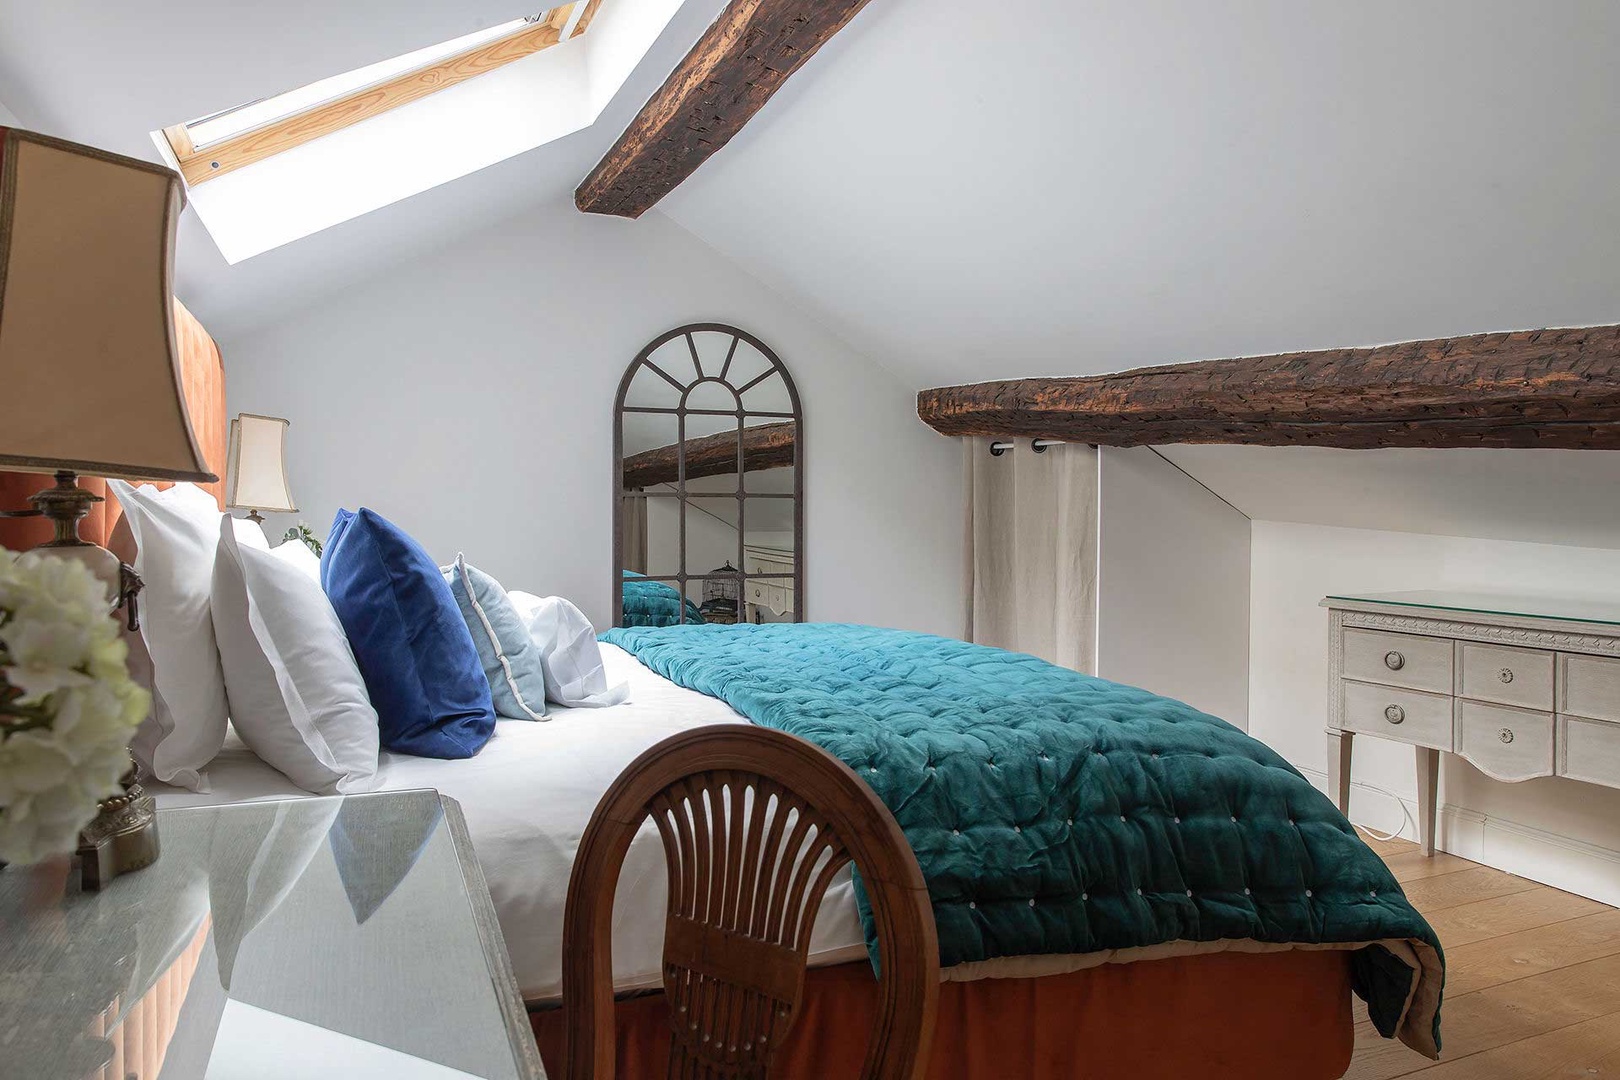 Exposed wood beams at a historic touch.